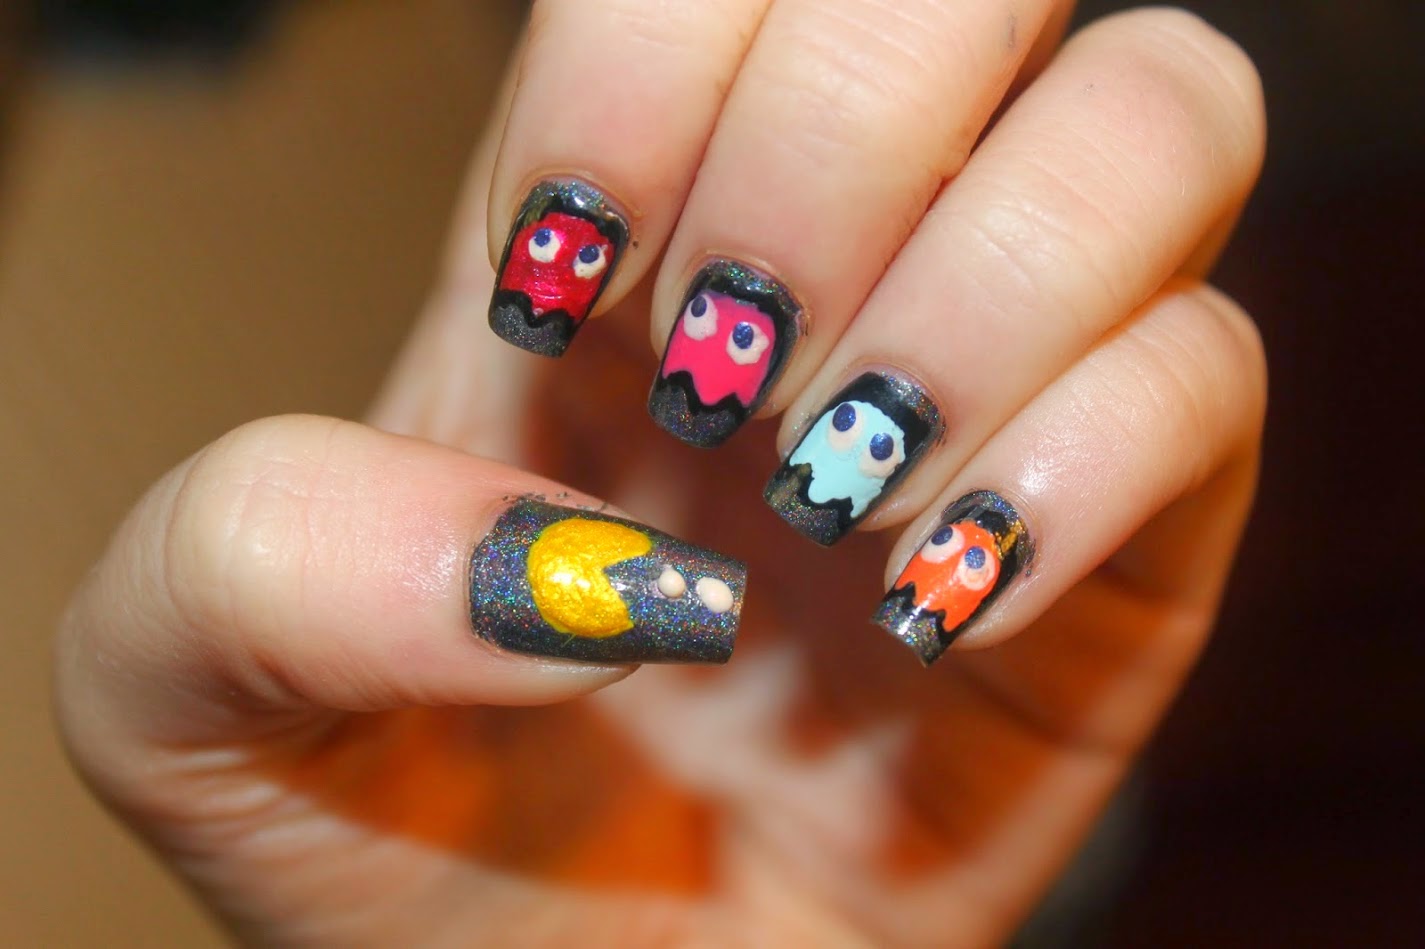 1. Pacman Ghost Nail Art Design - wide 9